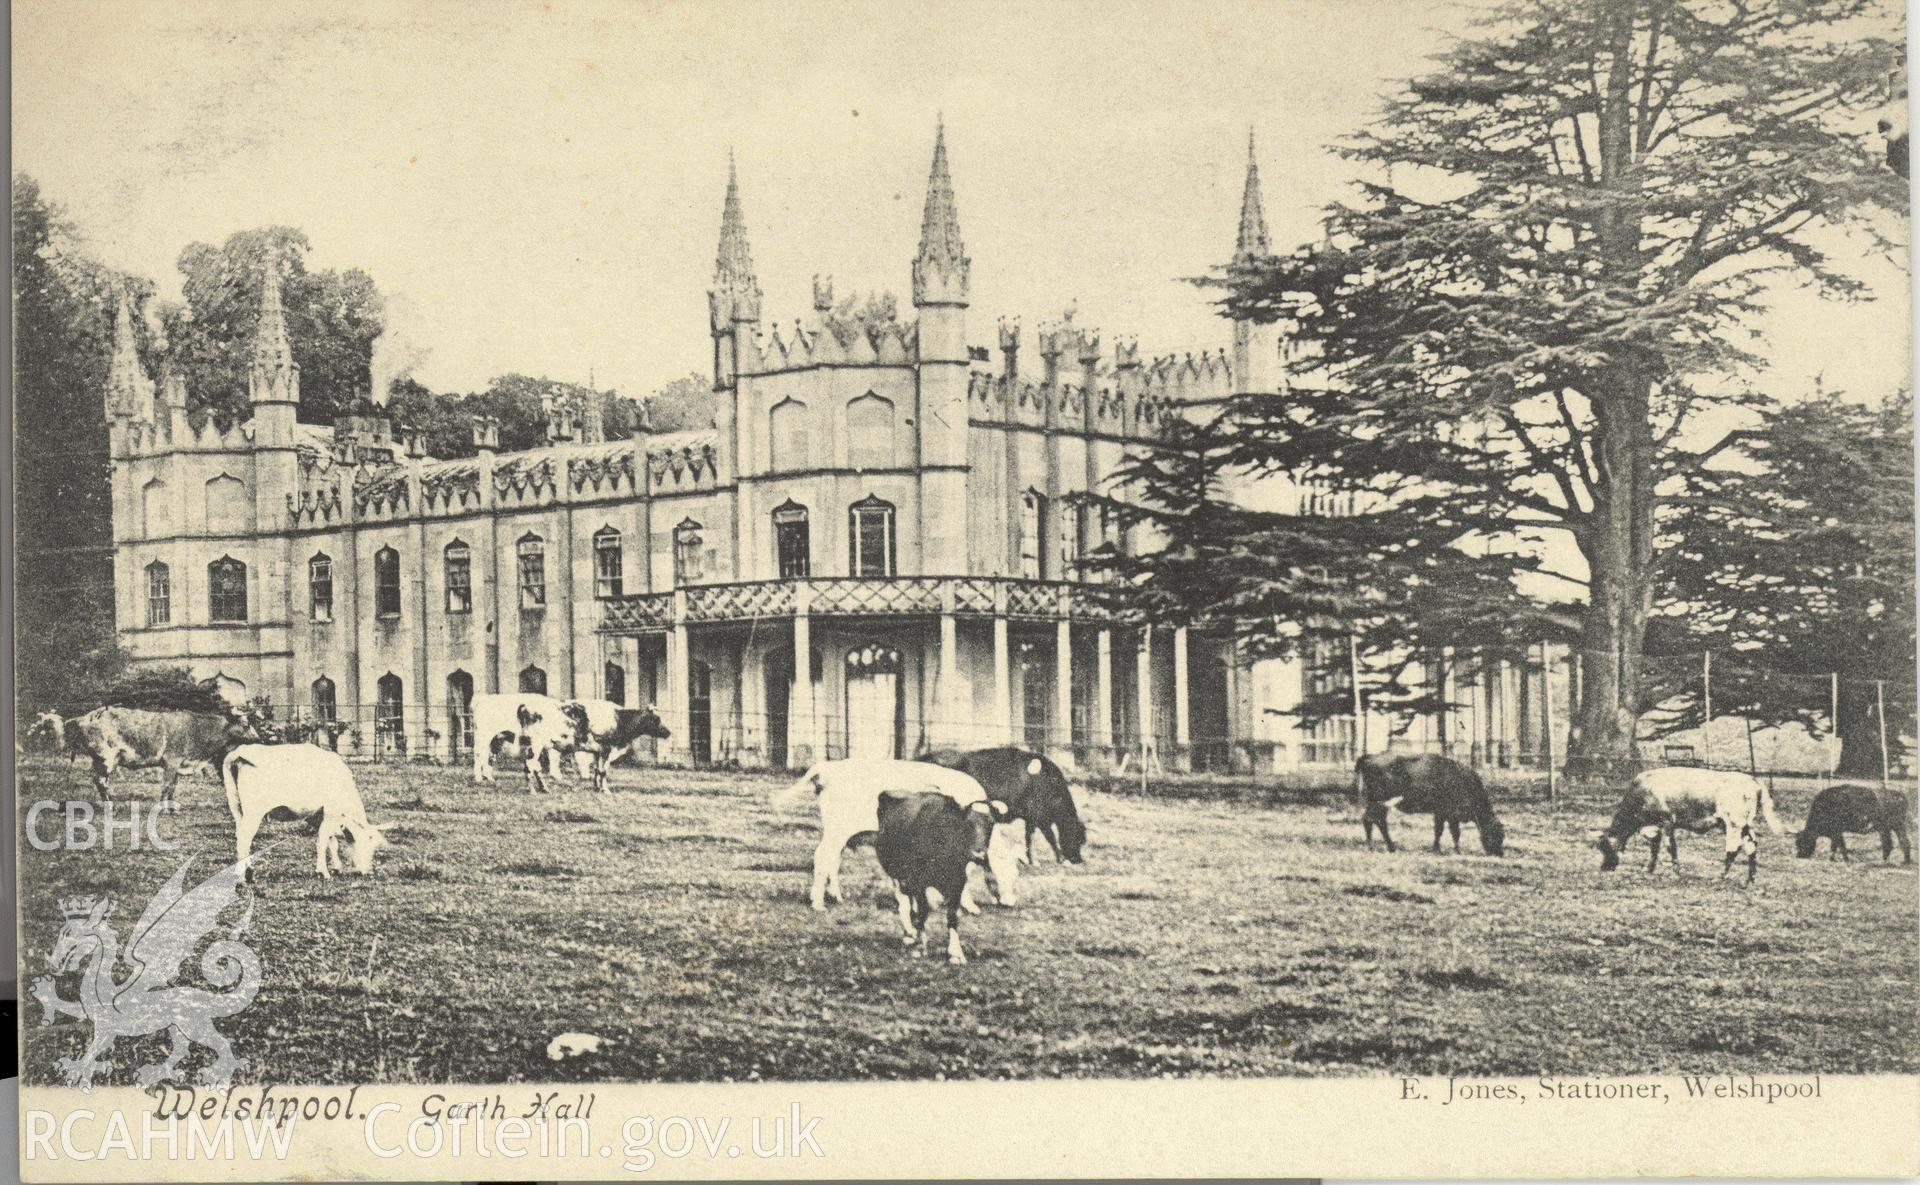 Digitised postcard image of Garth Hall, Guilsfield, with cows, E. Jones, Stationer, Welshpool. Produced by Parks and Gardens Data Services, from an original item in the Peter Davis Collection at Parks and Gardens UK. We hold only web-resolution images of this collection, suitable for viewing on screen and for research purposes only. We do not hold the original images, or publication quality scans.